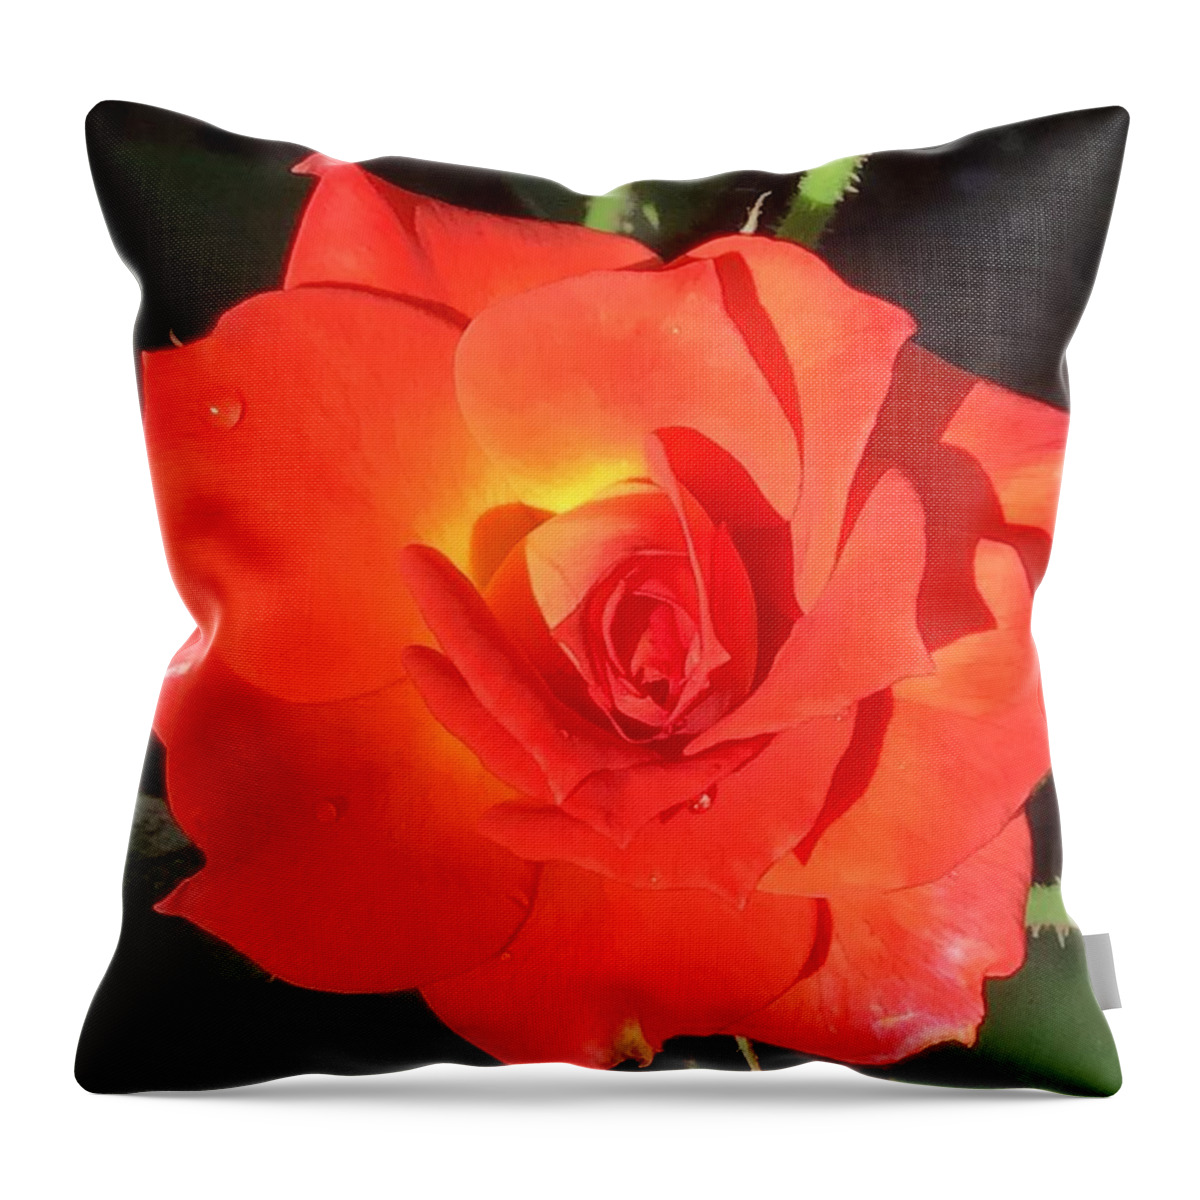 Rose Throw Pillow featuring the photograph Just Orange Bright Rose by Catherine Wilson